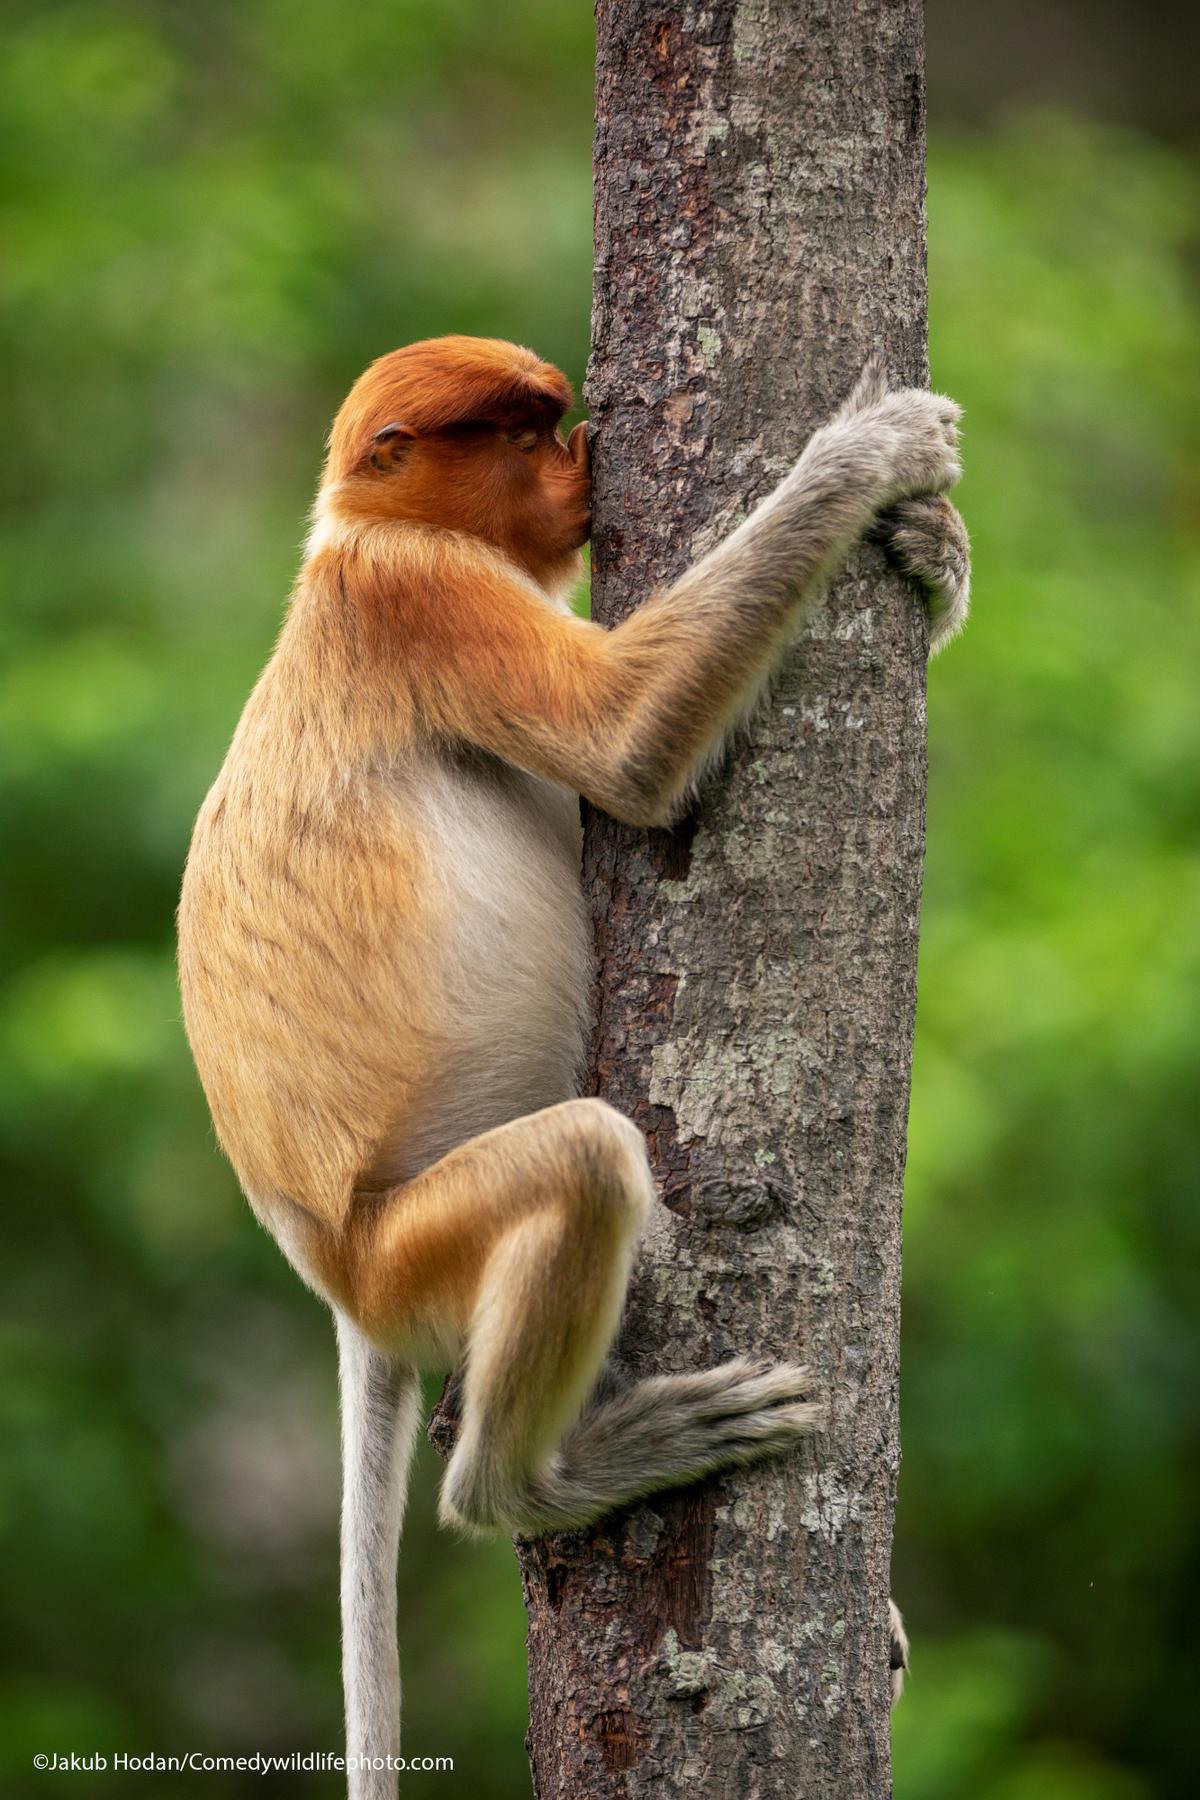 "Treehugger" by Jakub Hodan. This proboscis monkey could be just scratching its nose on the rough bark, or it could be kissing it. Trees play a big role in the lives of monkeys. Who are we to judge? (Courtesy of Jakub Hodan/<a href="https://www.facebook.com/comedywildlifephotoawards">Comedy Wildlife PhotographyAwards 2021</a>)